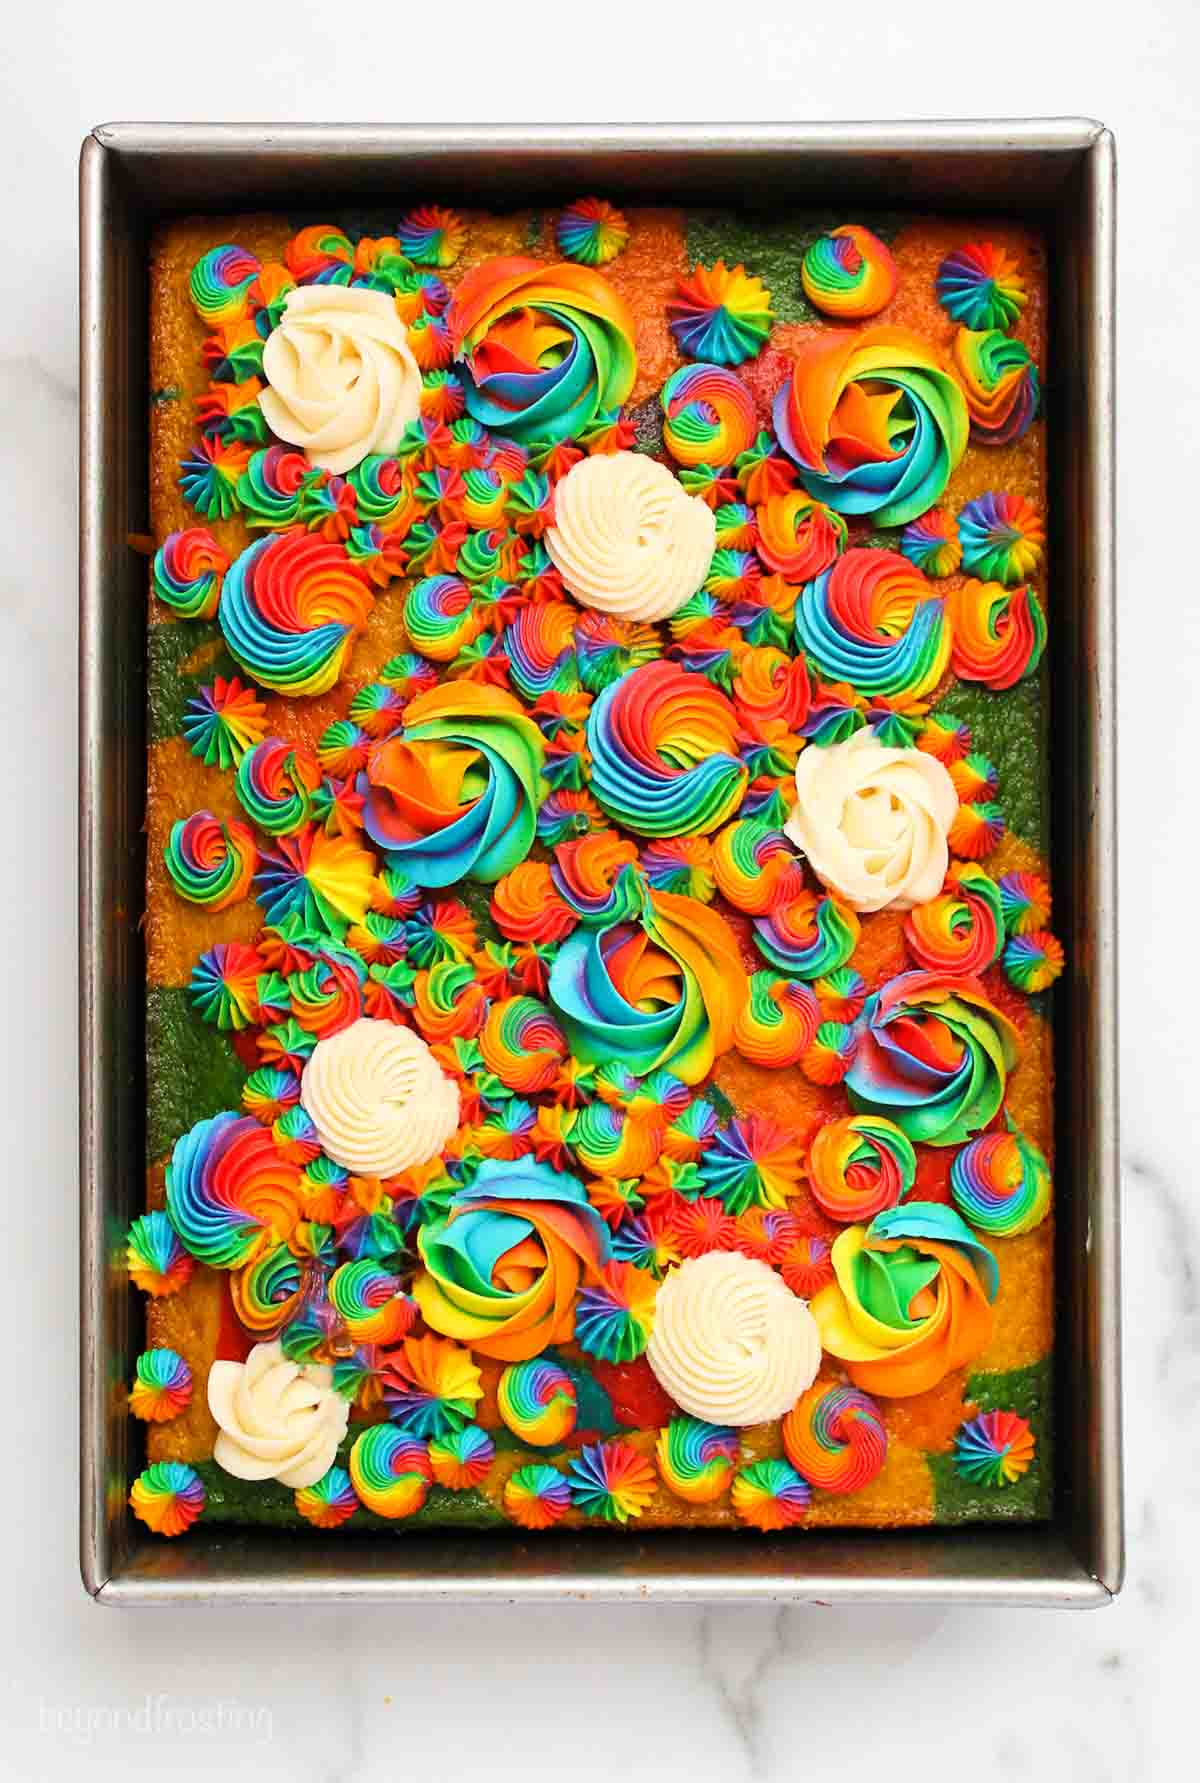 Rainbow cake topped with rainbow and white frosting rosettes